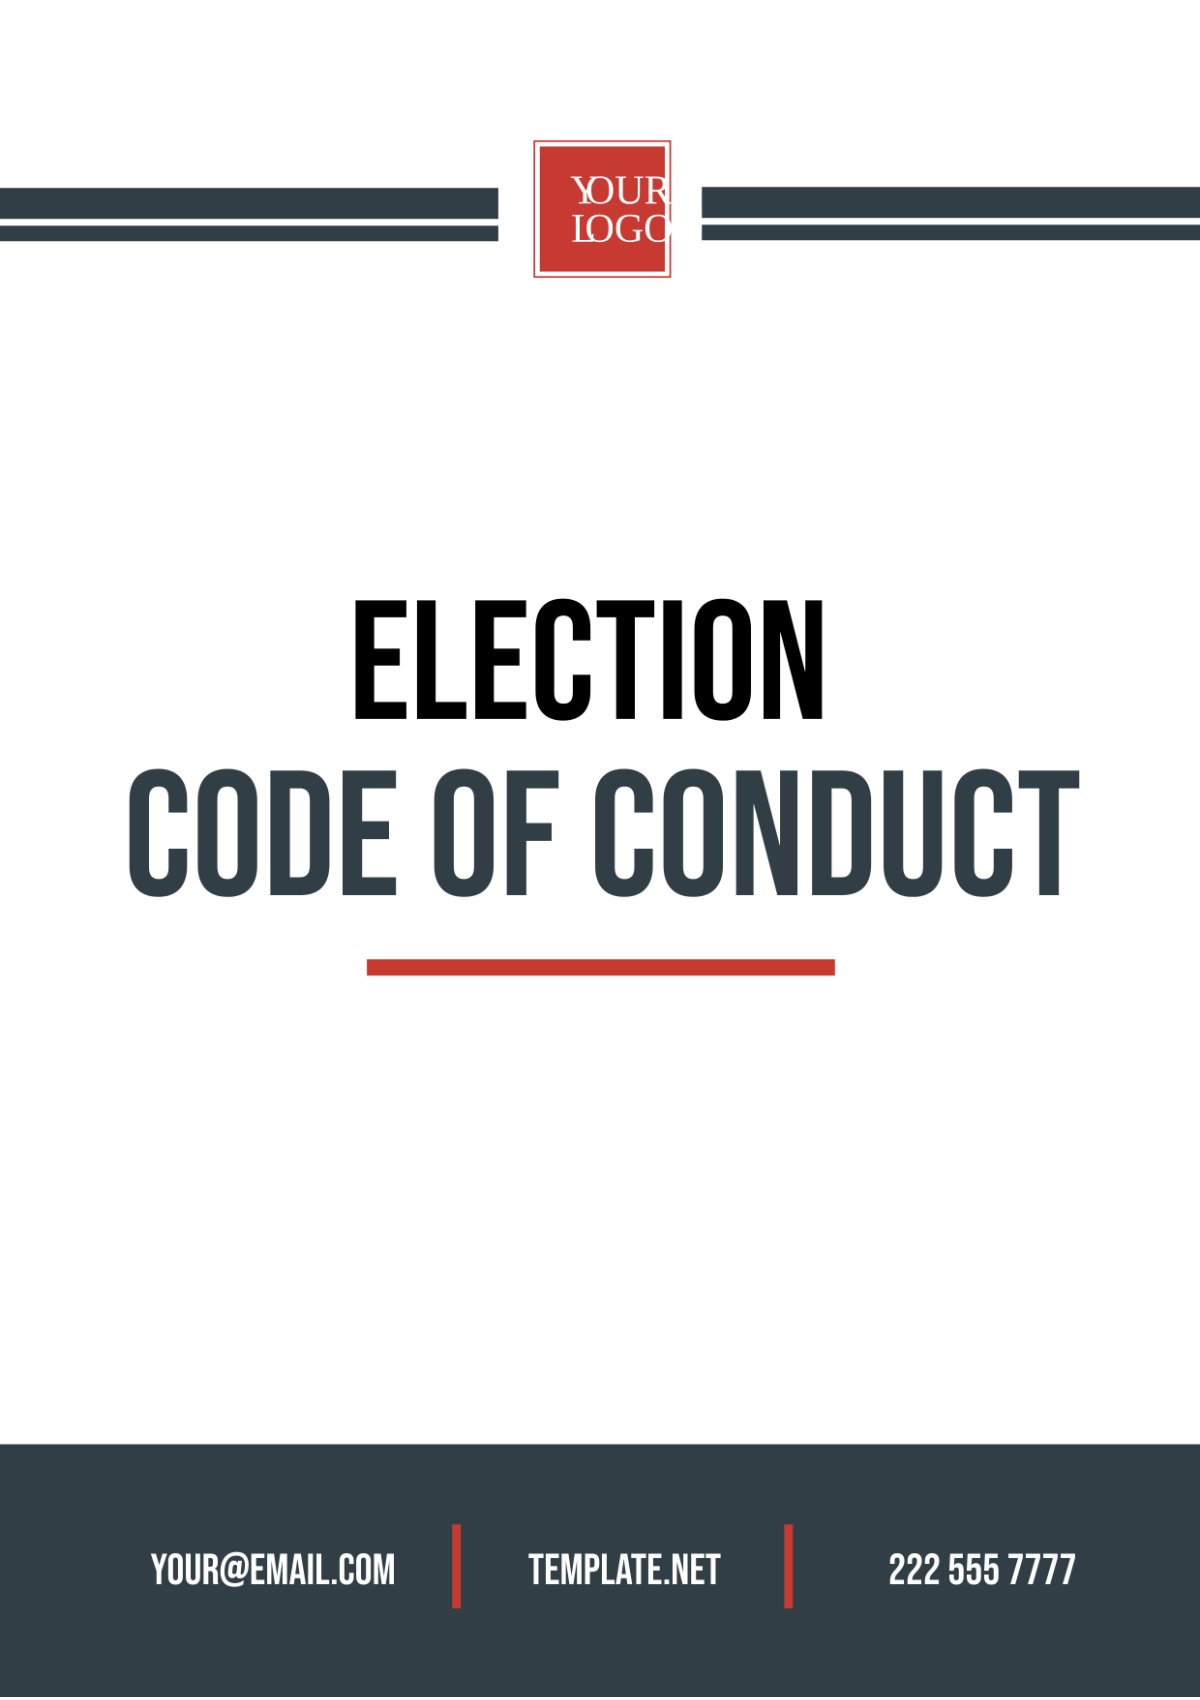 Election Code of Conduct Template